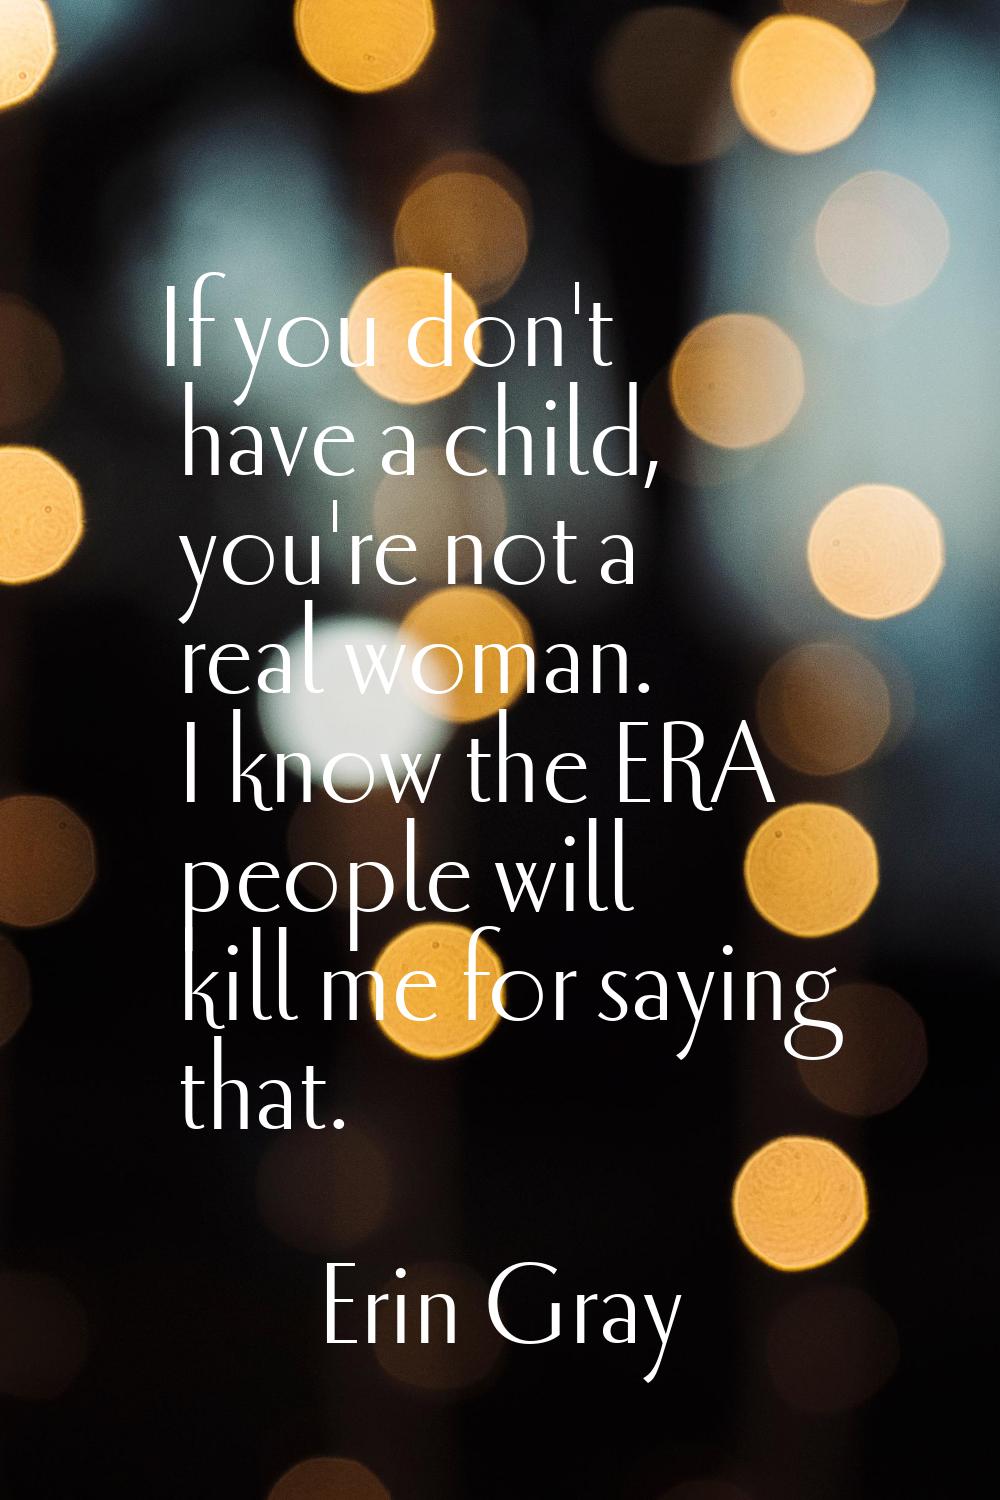 If you don't have a child, you're not a real woman. I know the ERA people will kill me for saying t